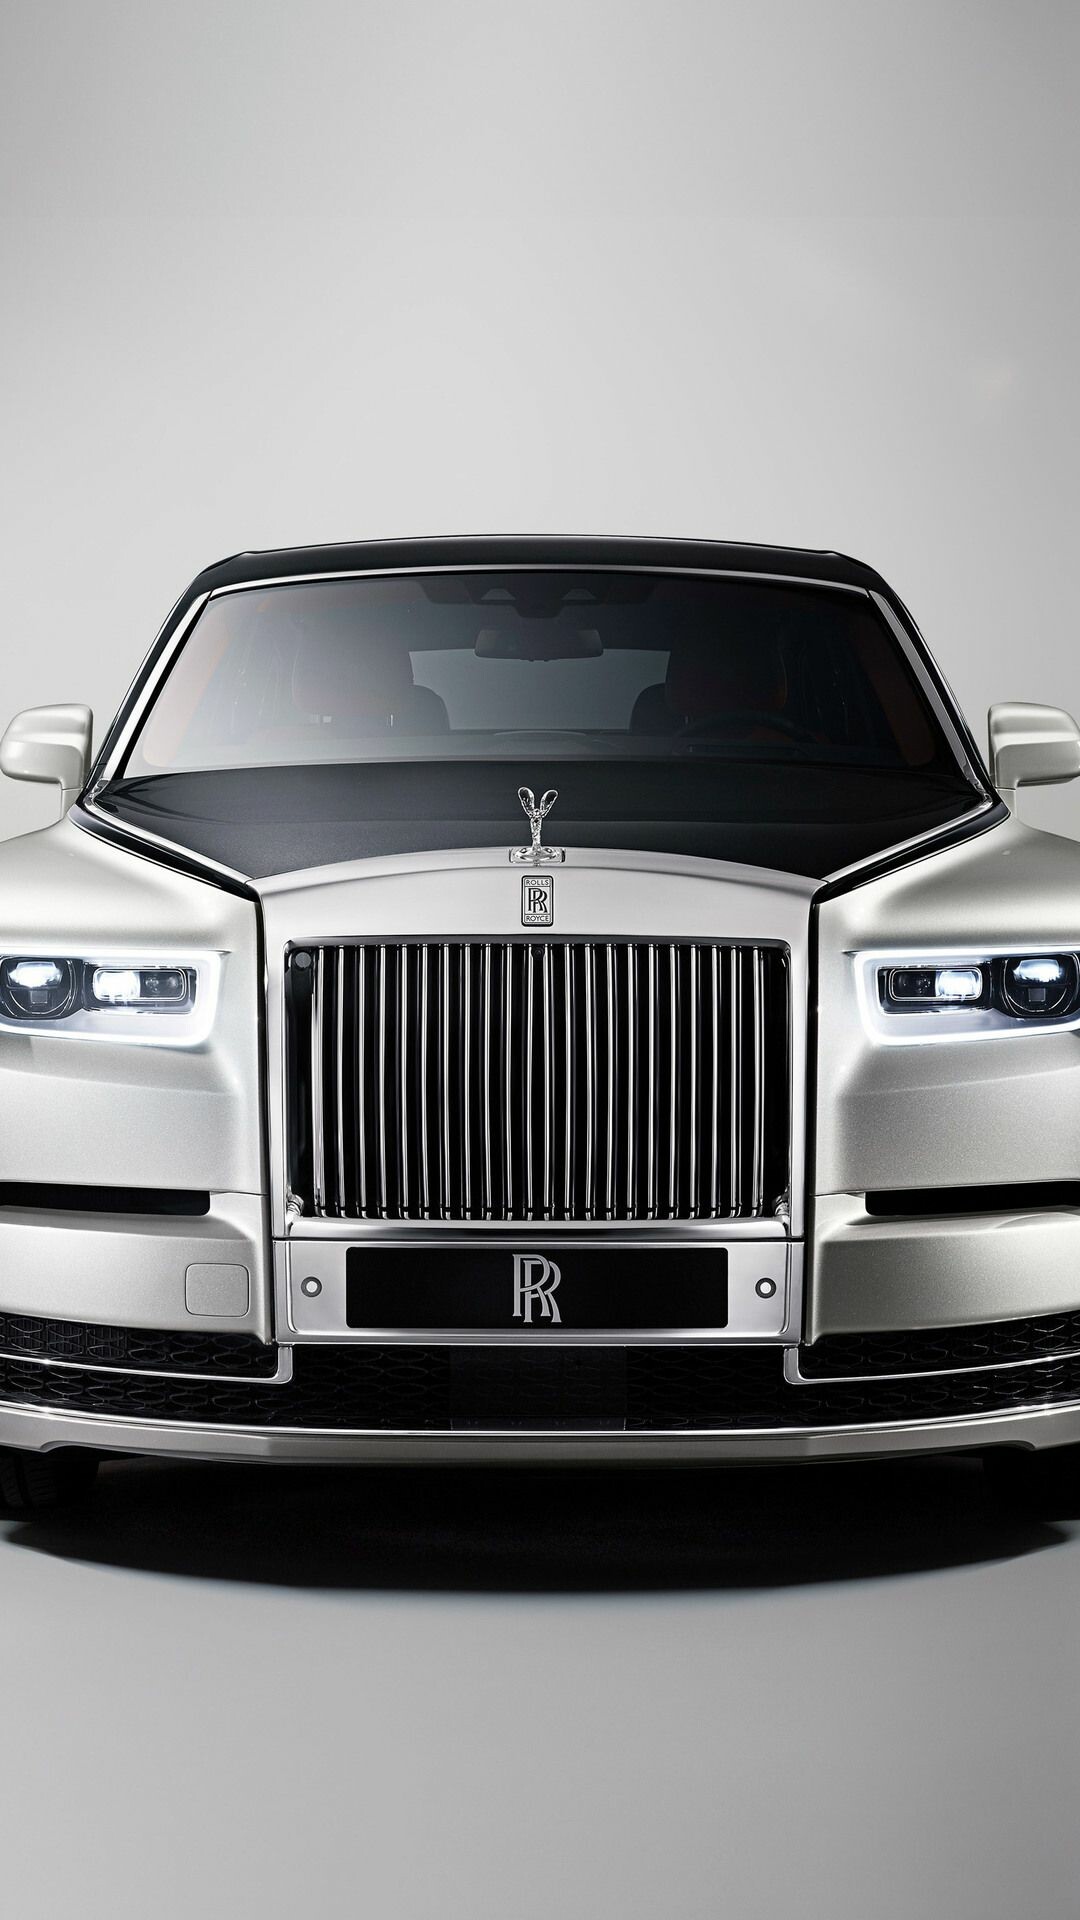 Rolls-Royce: Phantom, the current Flagship Model and the most expensive production car made by the company. 1080x1920 Full HD Background.